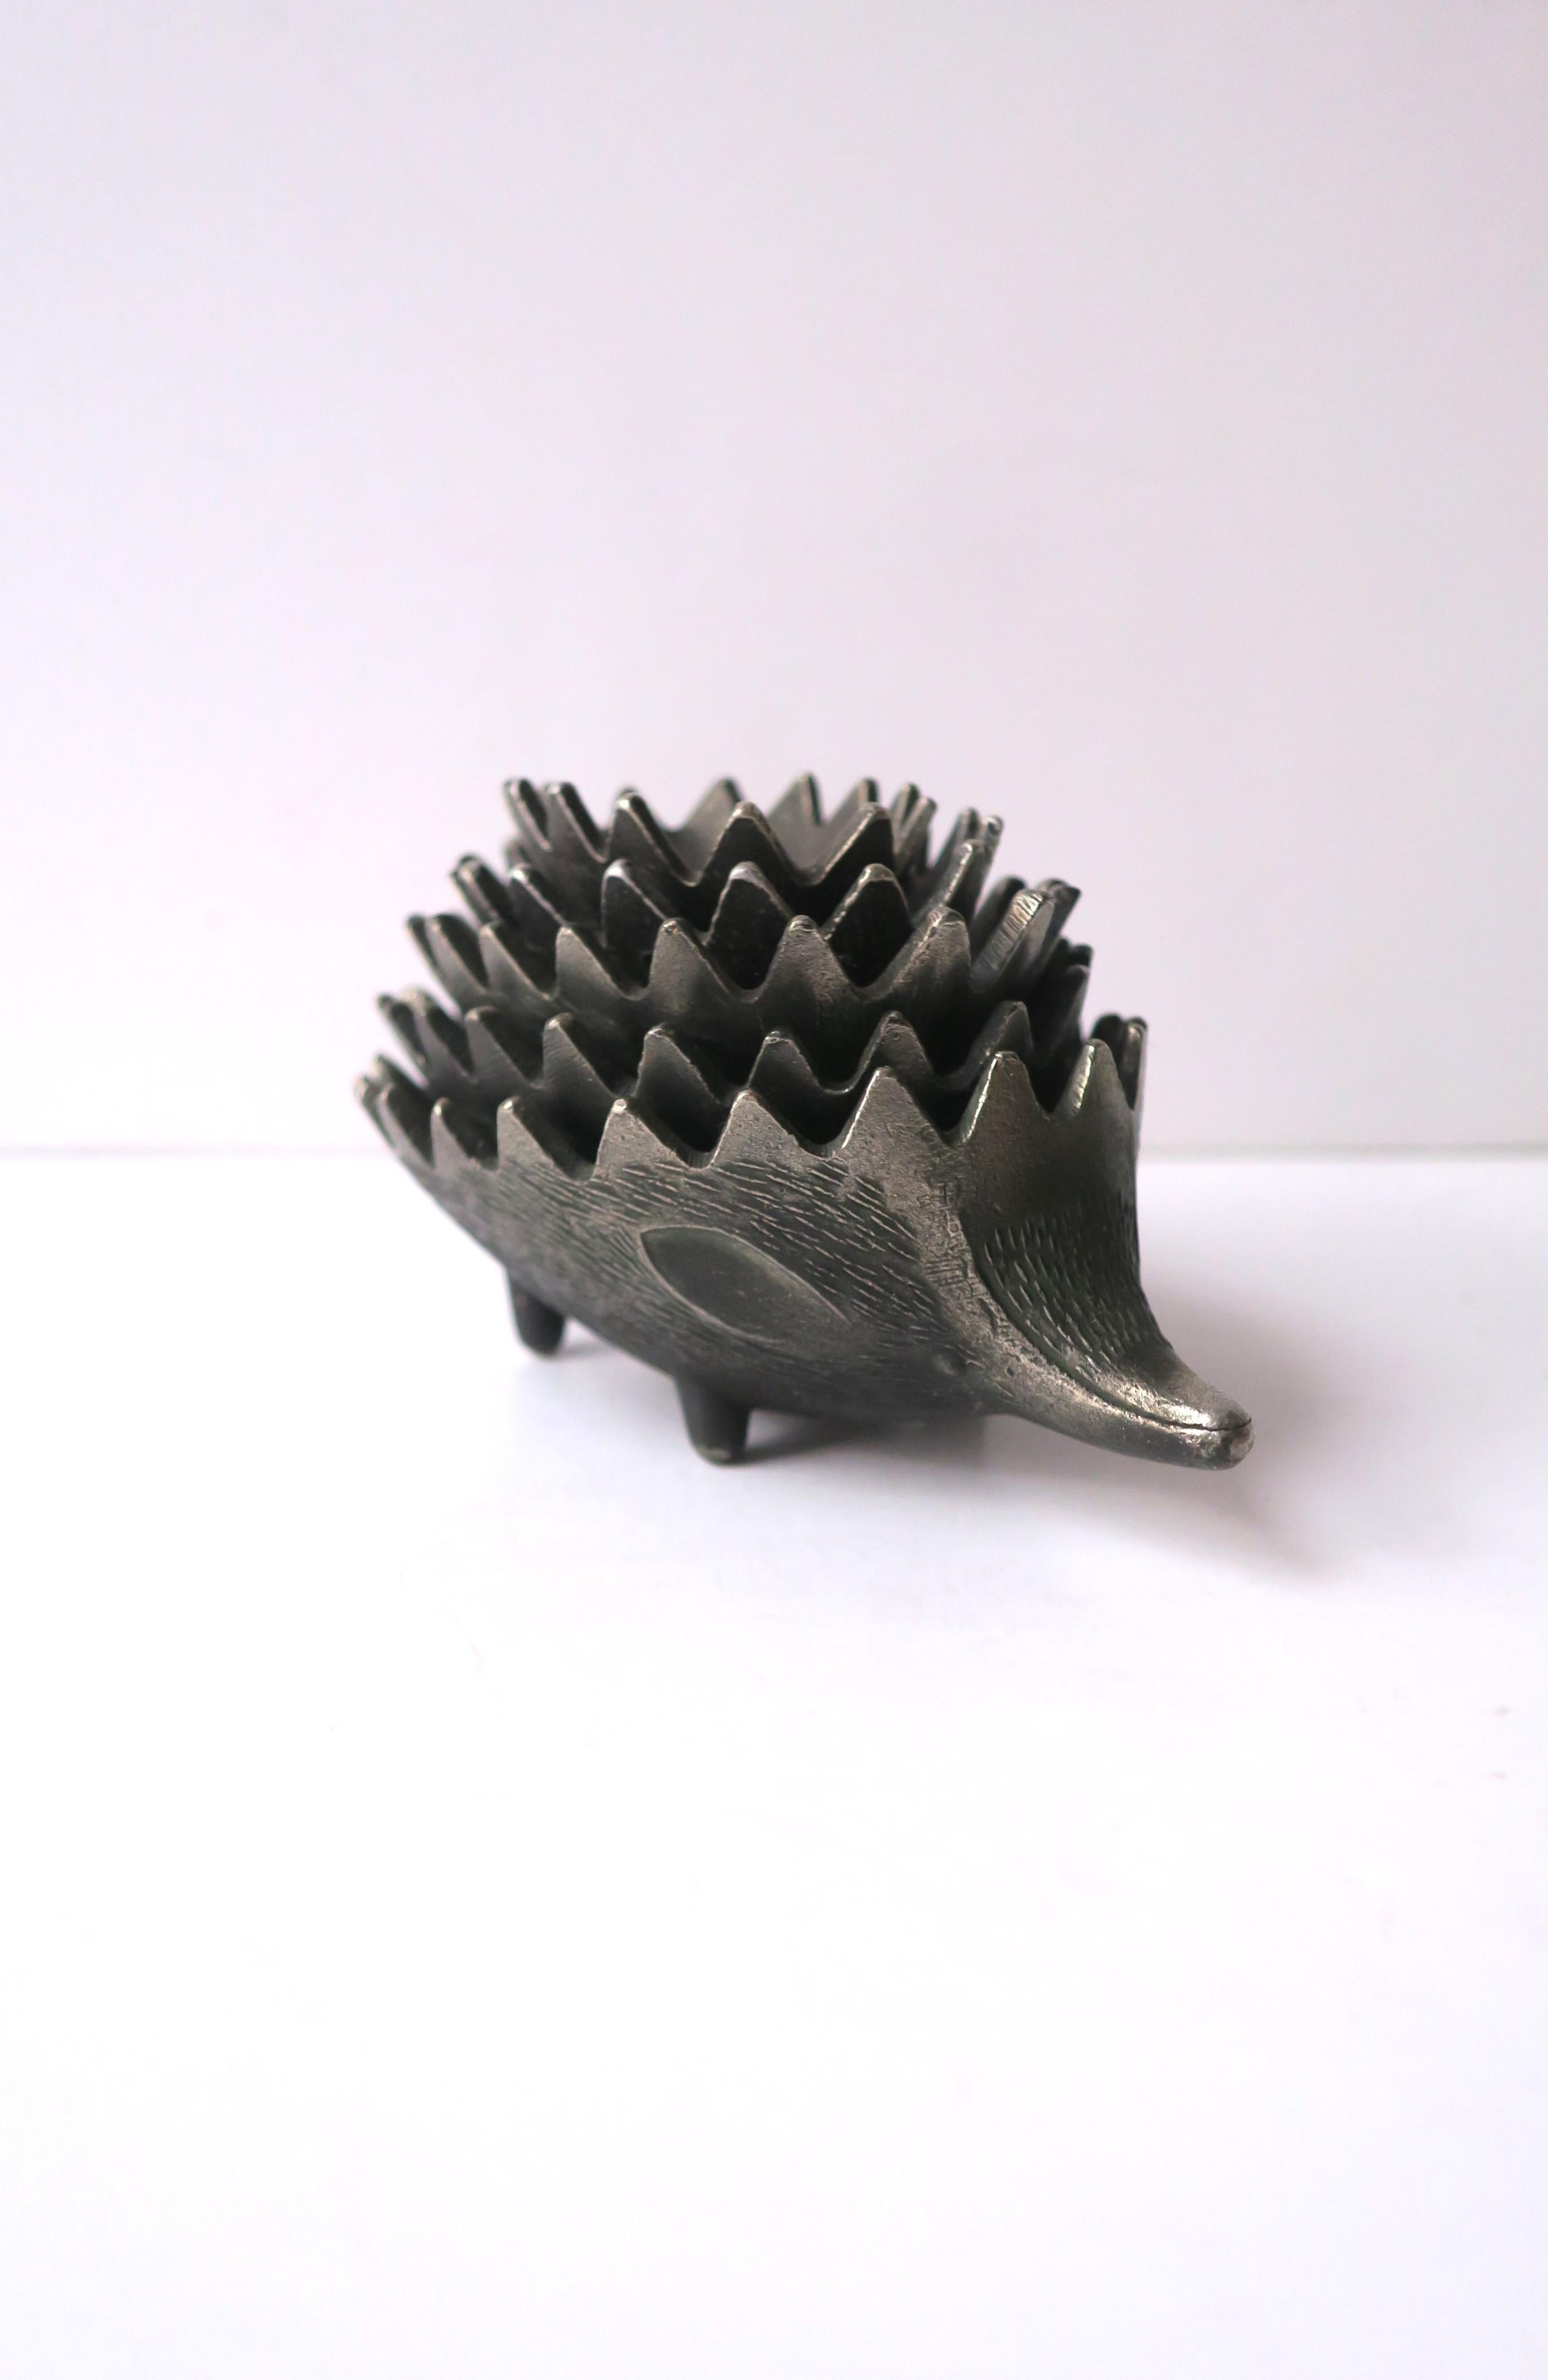 A set of five (5) stackable Hedgehog metal bowls, ashtrays, or decorative object, in the style of artist Walter Bosse, Midcentury Modern design period, circa mid-20th century, Europe (maybe Austria or Germany.) Each hedgehog 'bowl' has textured